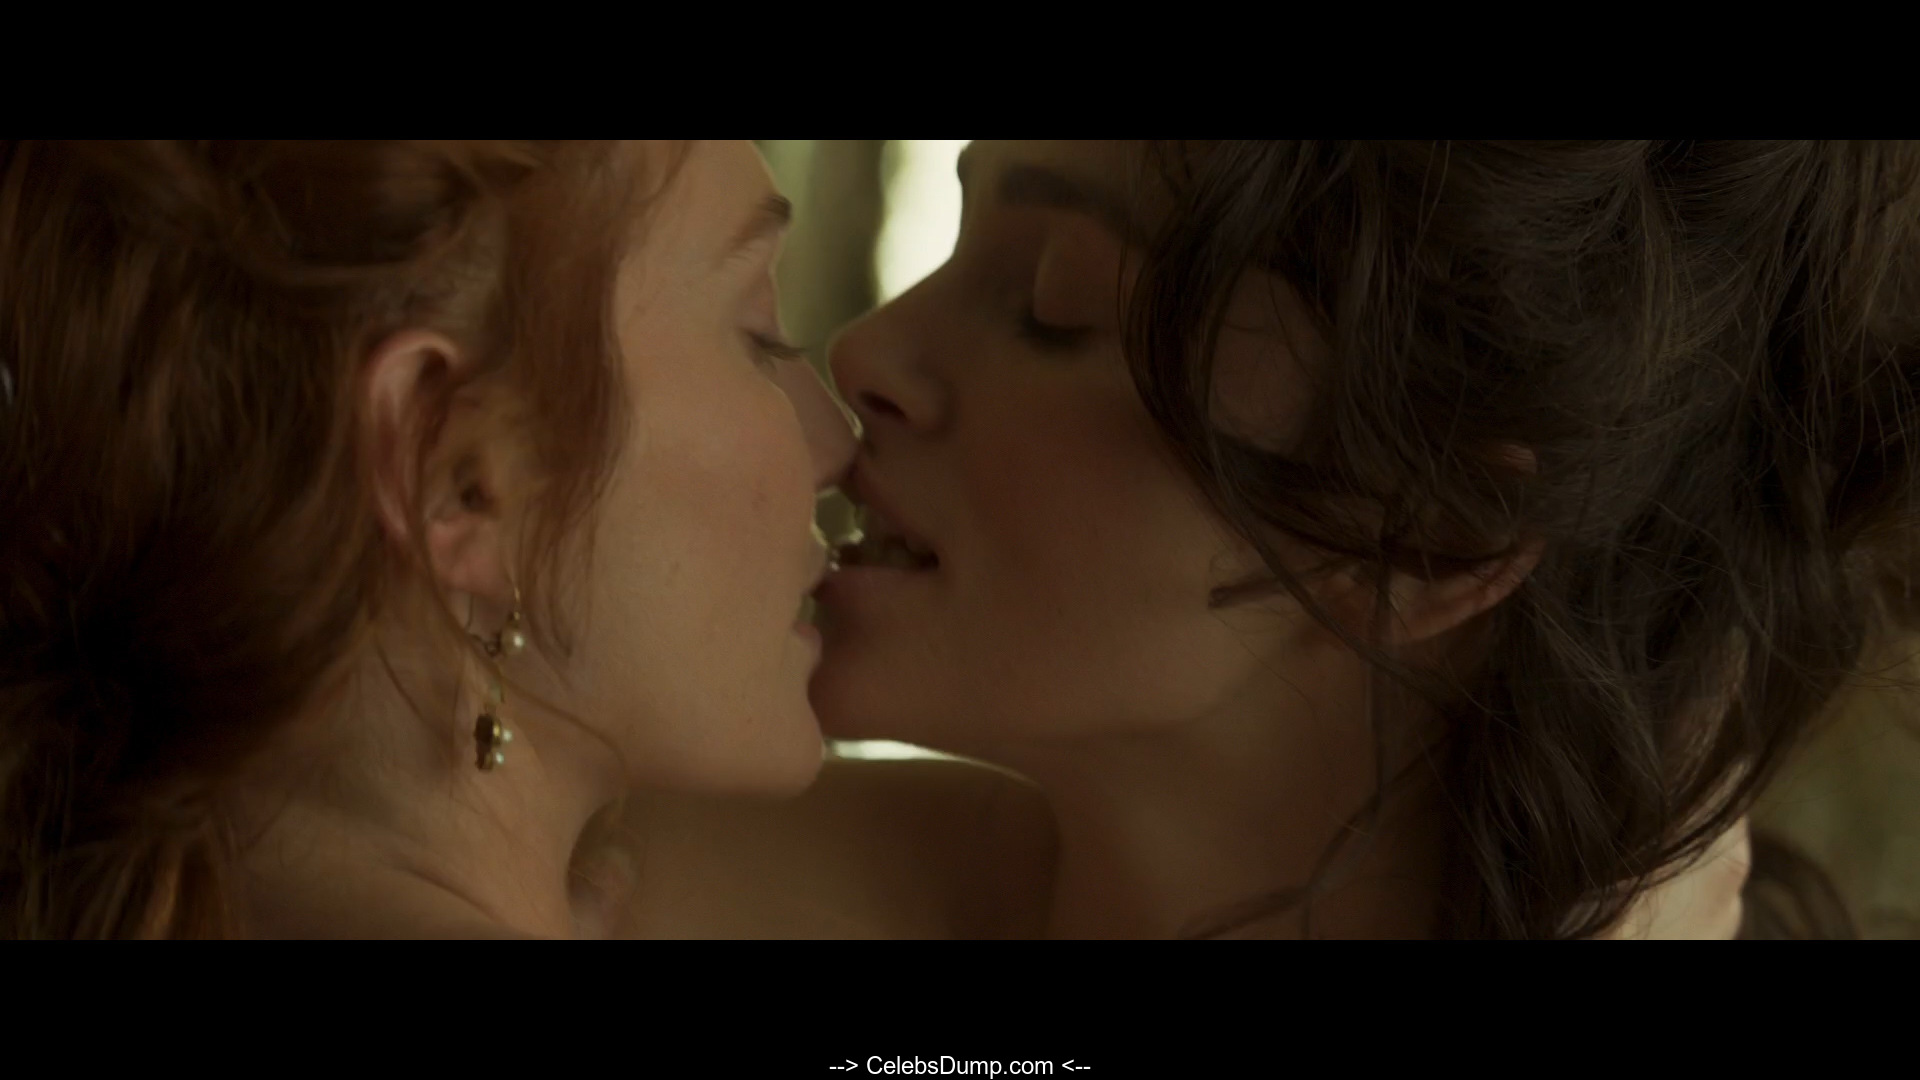 Keira Knightley and Eleanor Tomlinson topless.